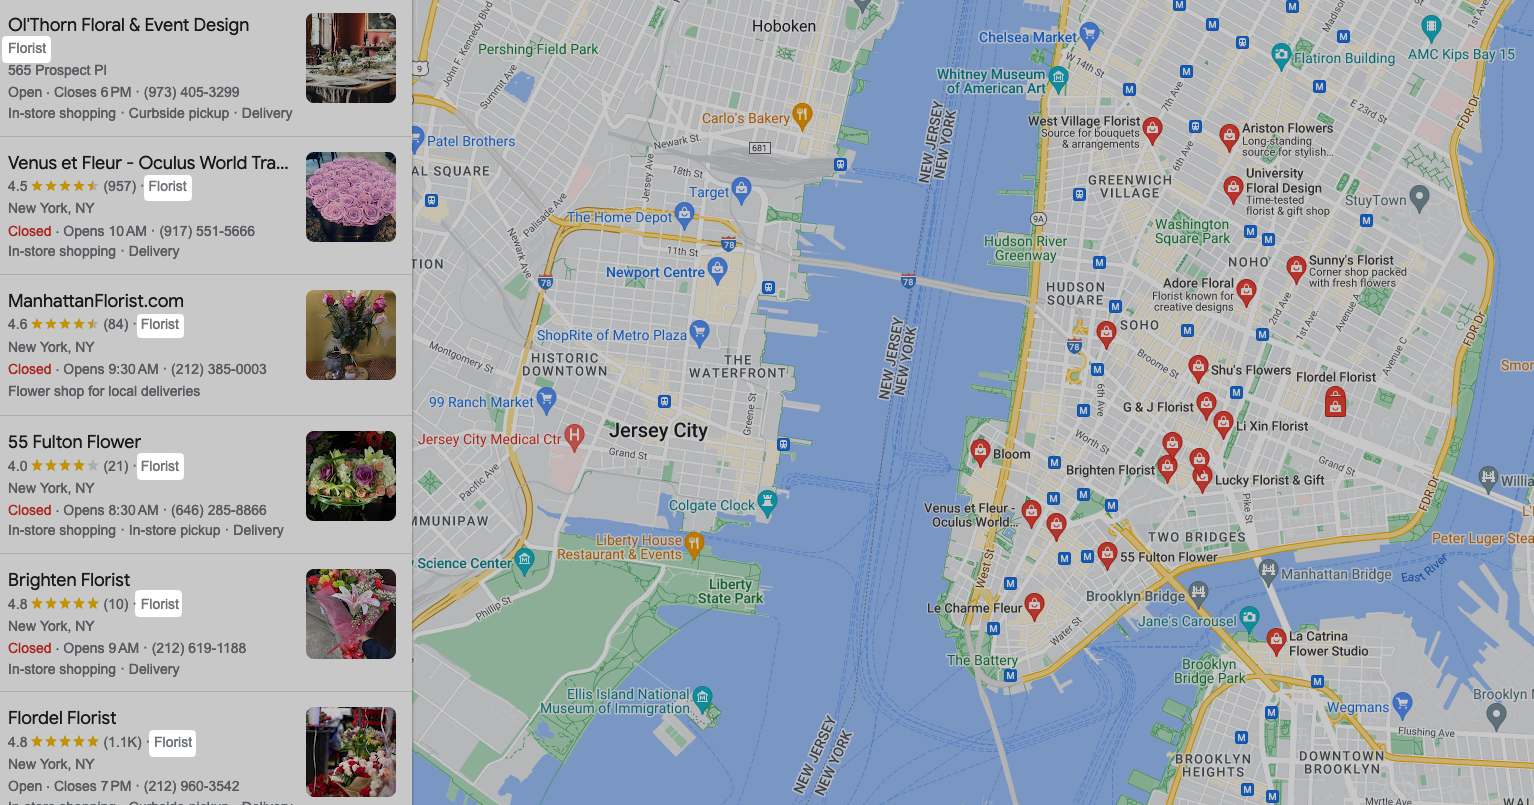 Google search results for search for “florists in New York”